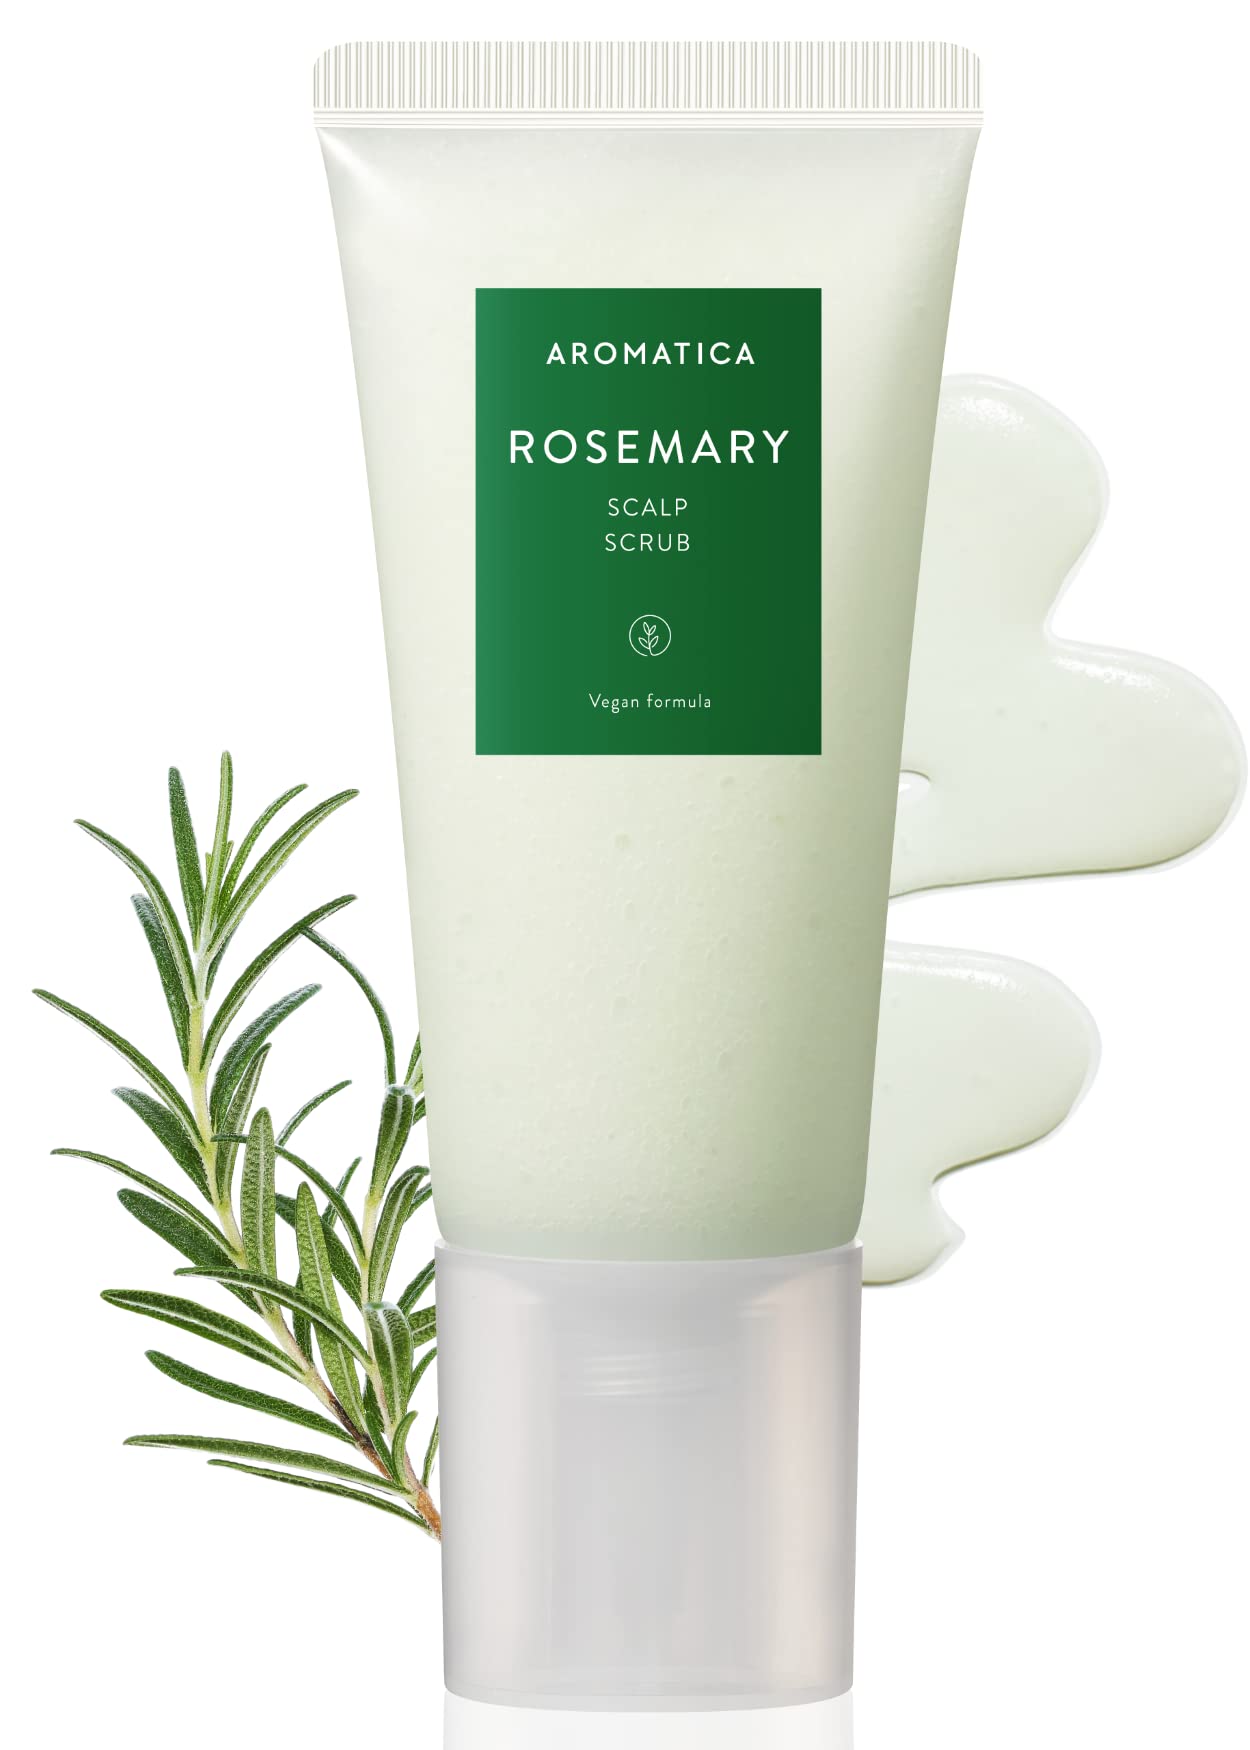 AROMATIcA Rosemary Scalp Scrub 582oz  165g, Sulfate-Free, Silicone-Free, Vegan, cleansing with Salt granules, Invigorates and Ex